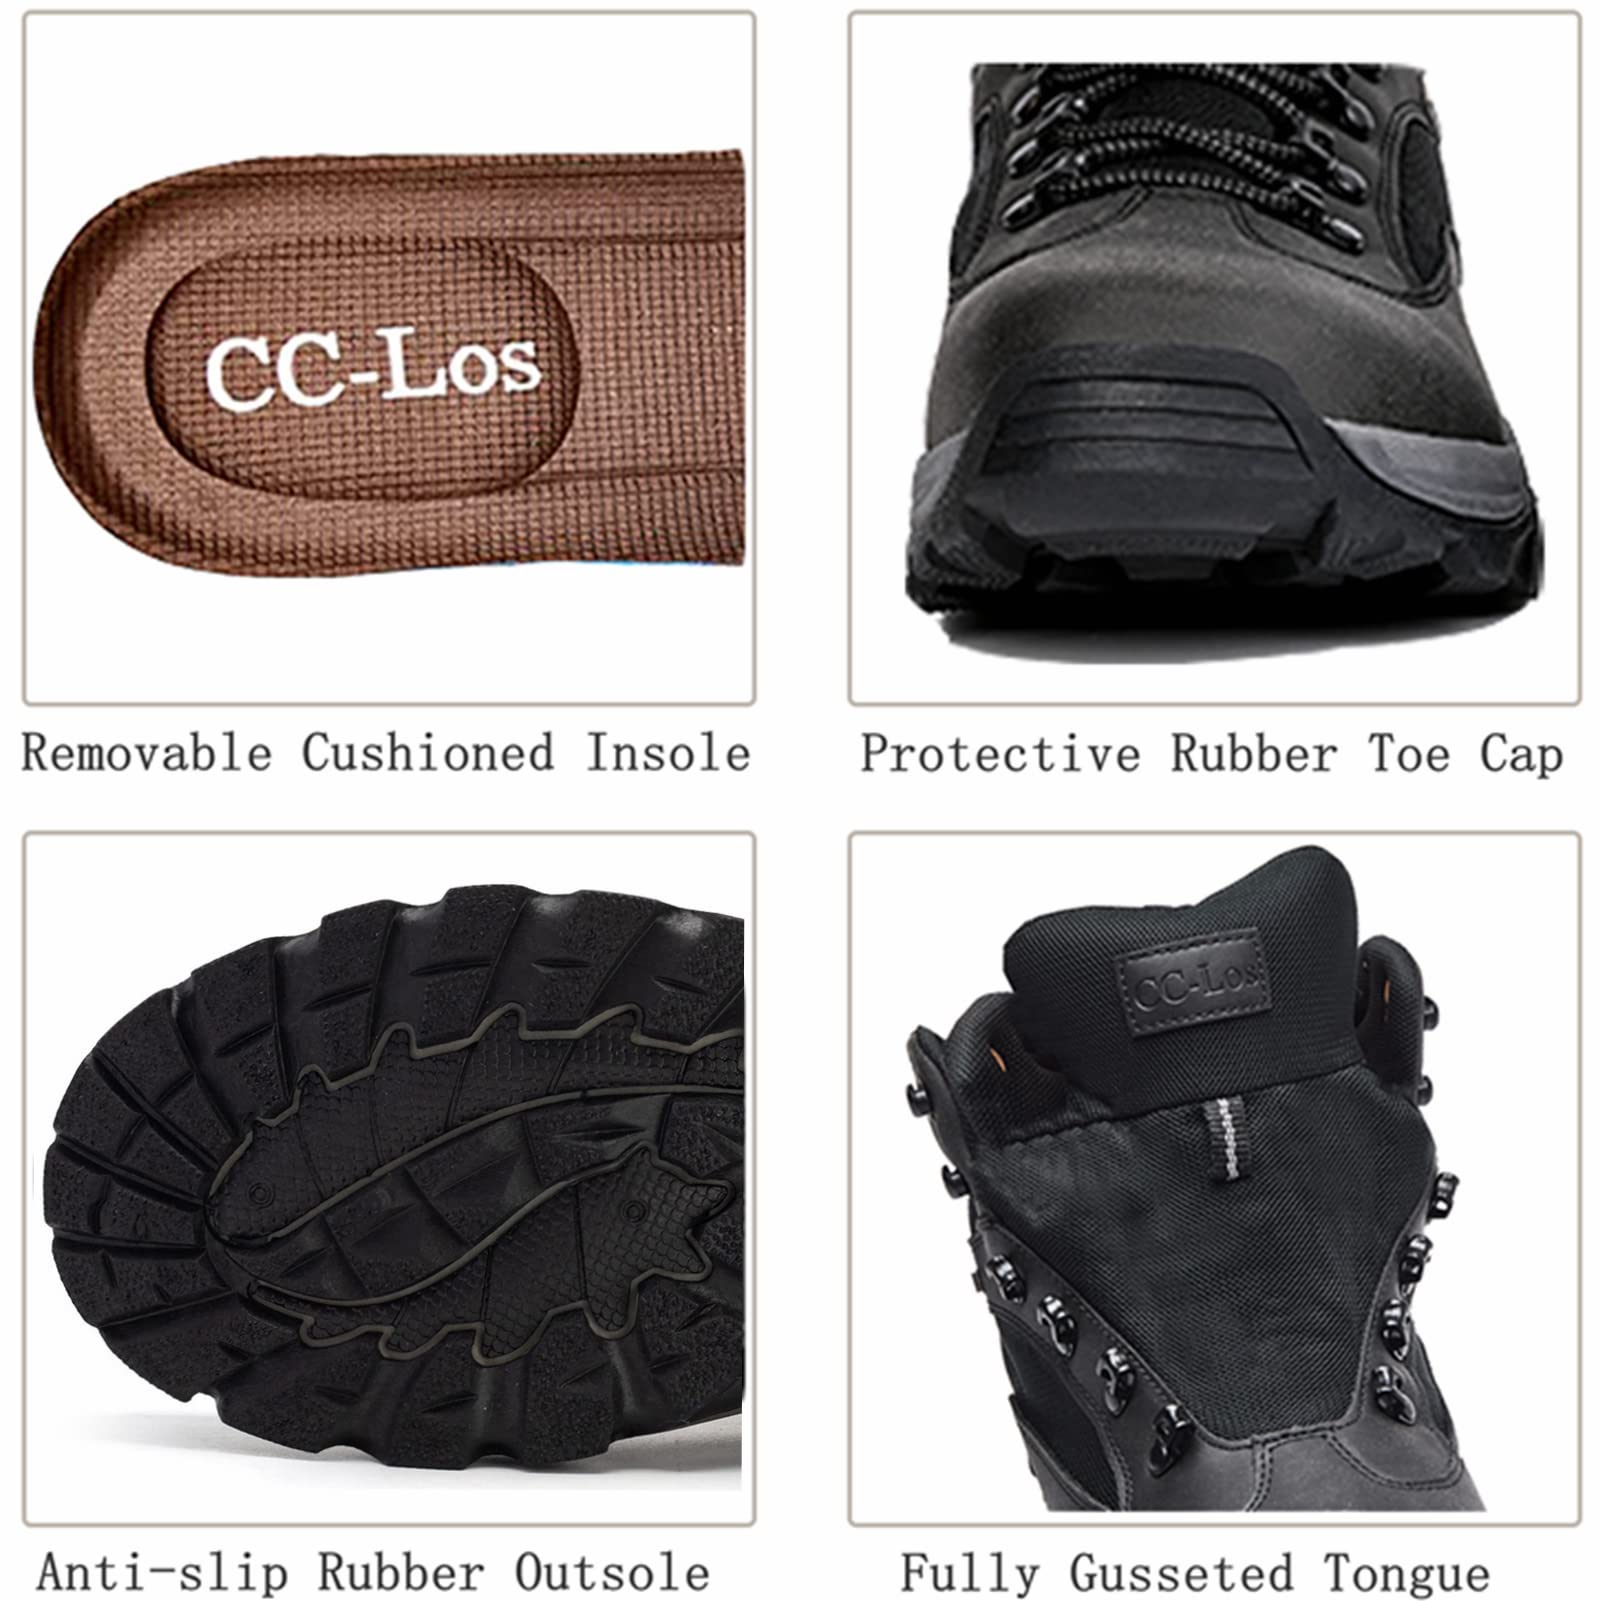 CC-Los Men's Waterproof Hiking Boots Work Boots Outdoor Relaxed Fit Lightweight Size 7-14